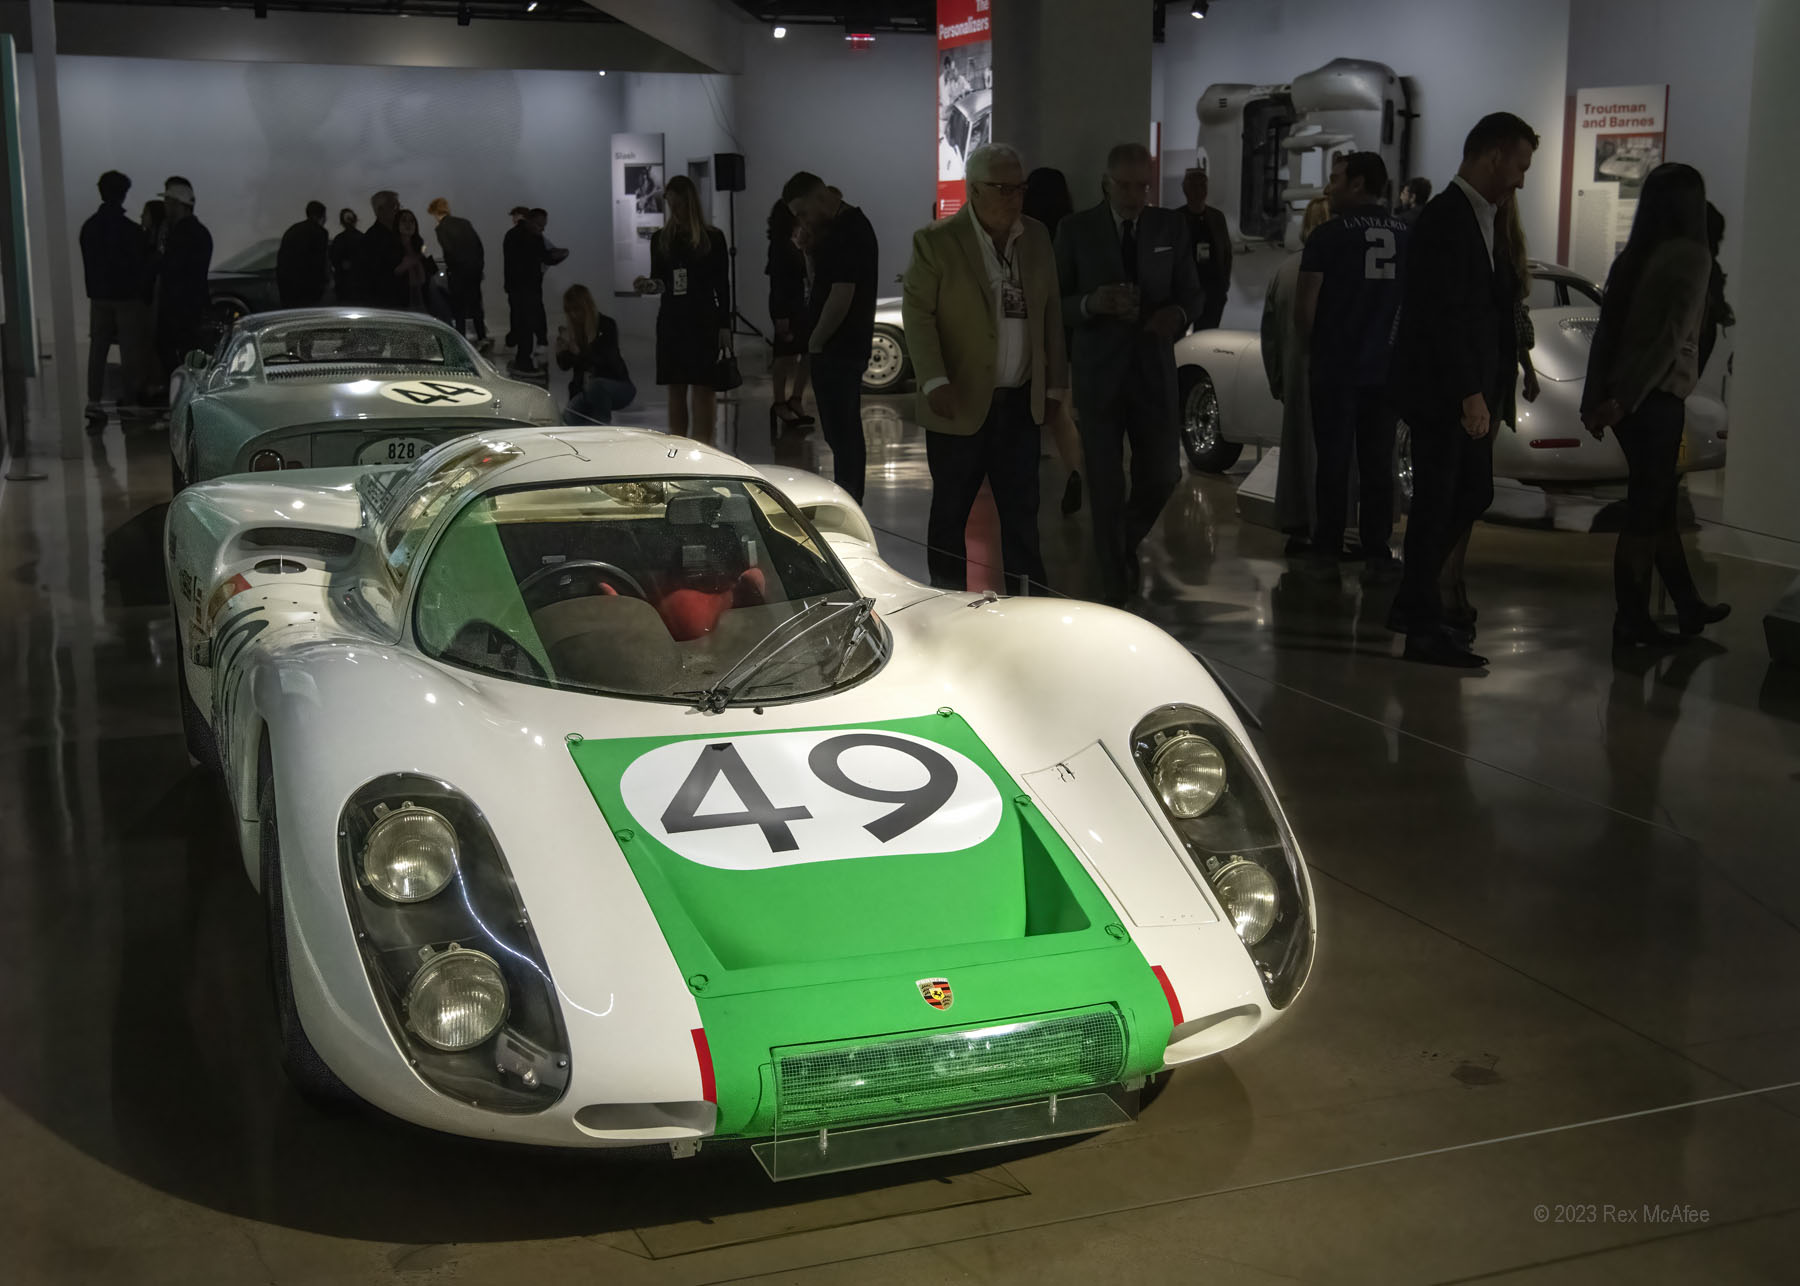 Driven by Jo Siffert and Hans Hermann, this 1966 Porsche 907K chassis 024 won the 1968 12 Hours of Sebring race, reaching an average speed of 102.512 mph. Photo © 2023 Rex McAfee RexMcAfee@gmail.com